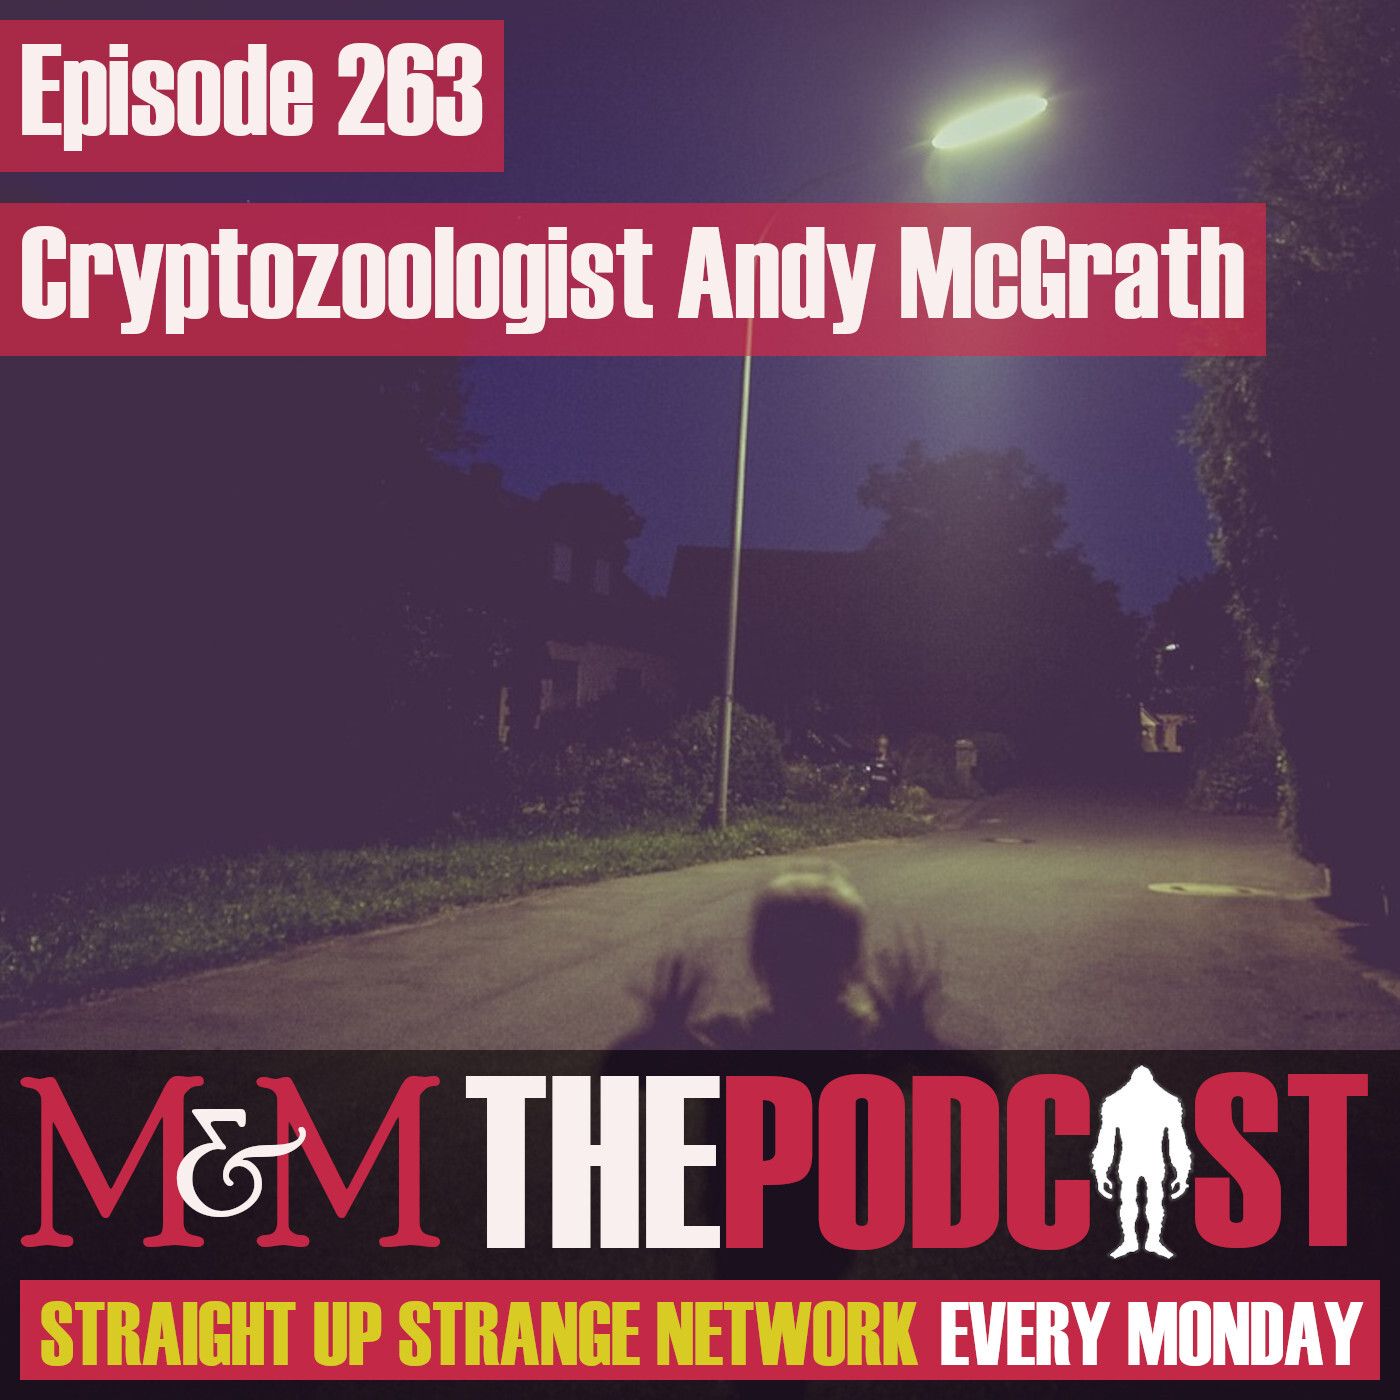 Mysteries and Monsters: Episode 263 Cryptoozologist Andy McGrath